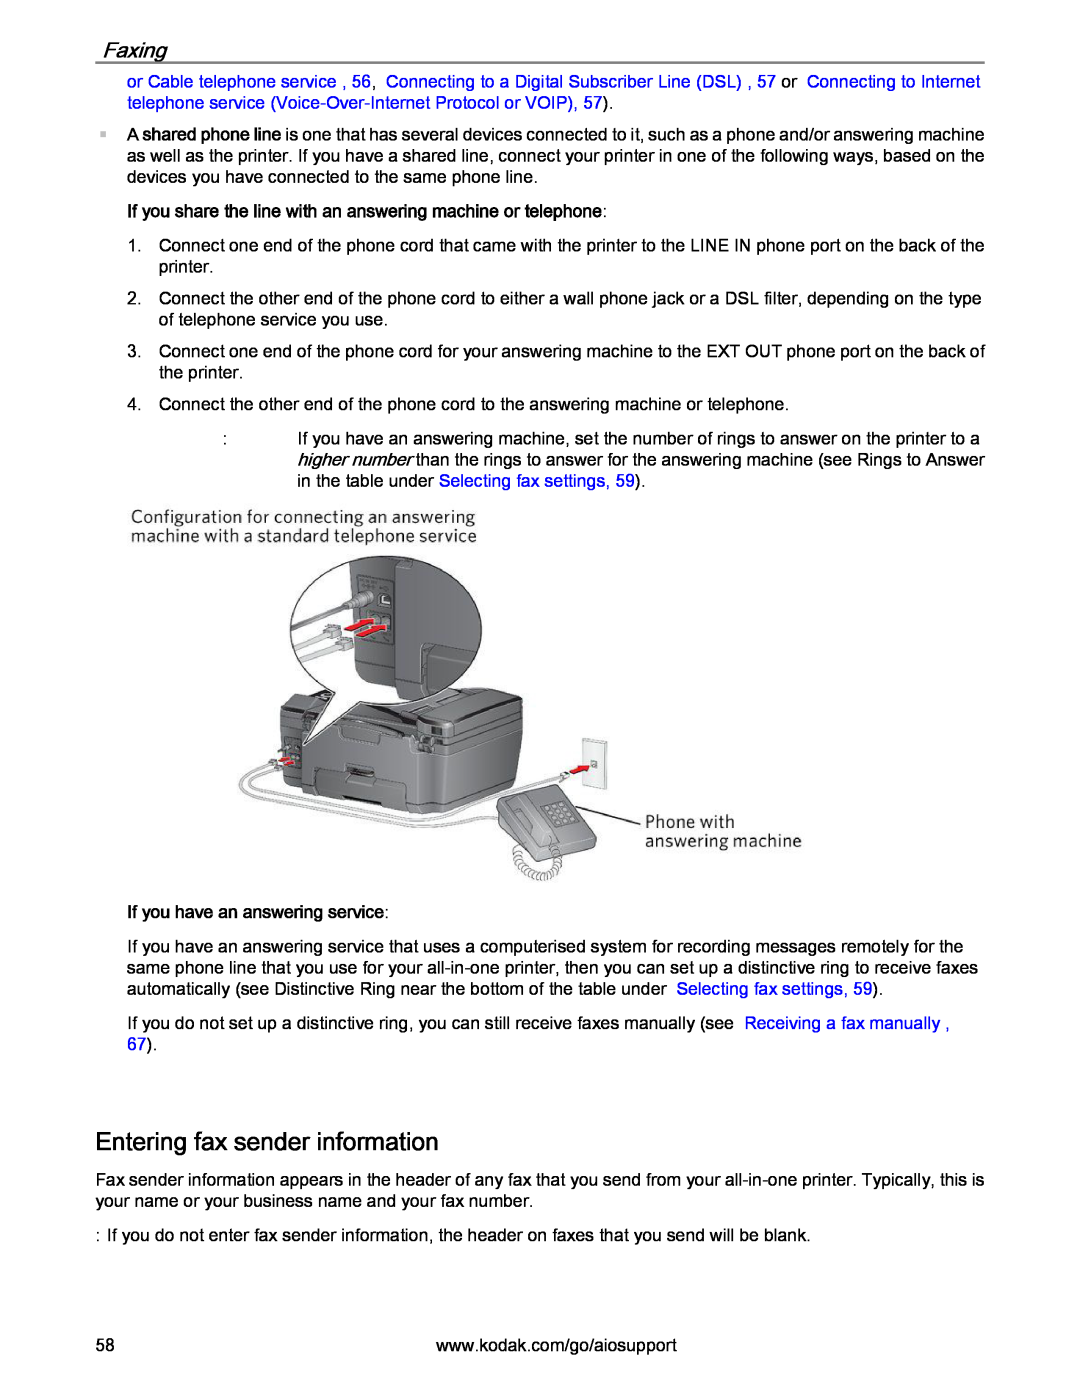 Kodak 2.2 manual Entering fax sender information, Faxing, If you share the line with an answering machine or telephone 